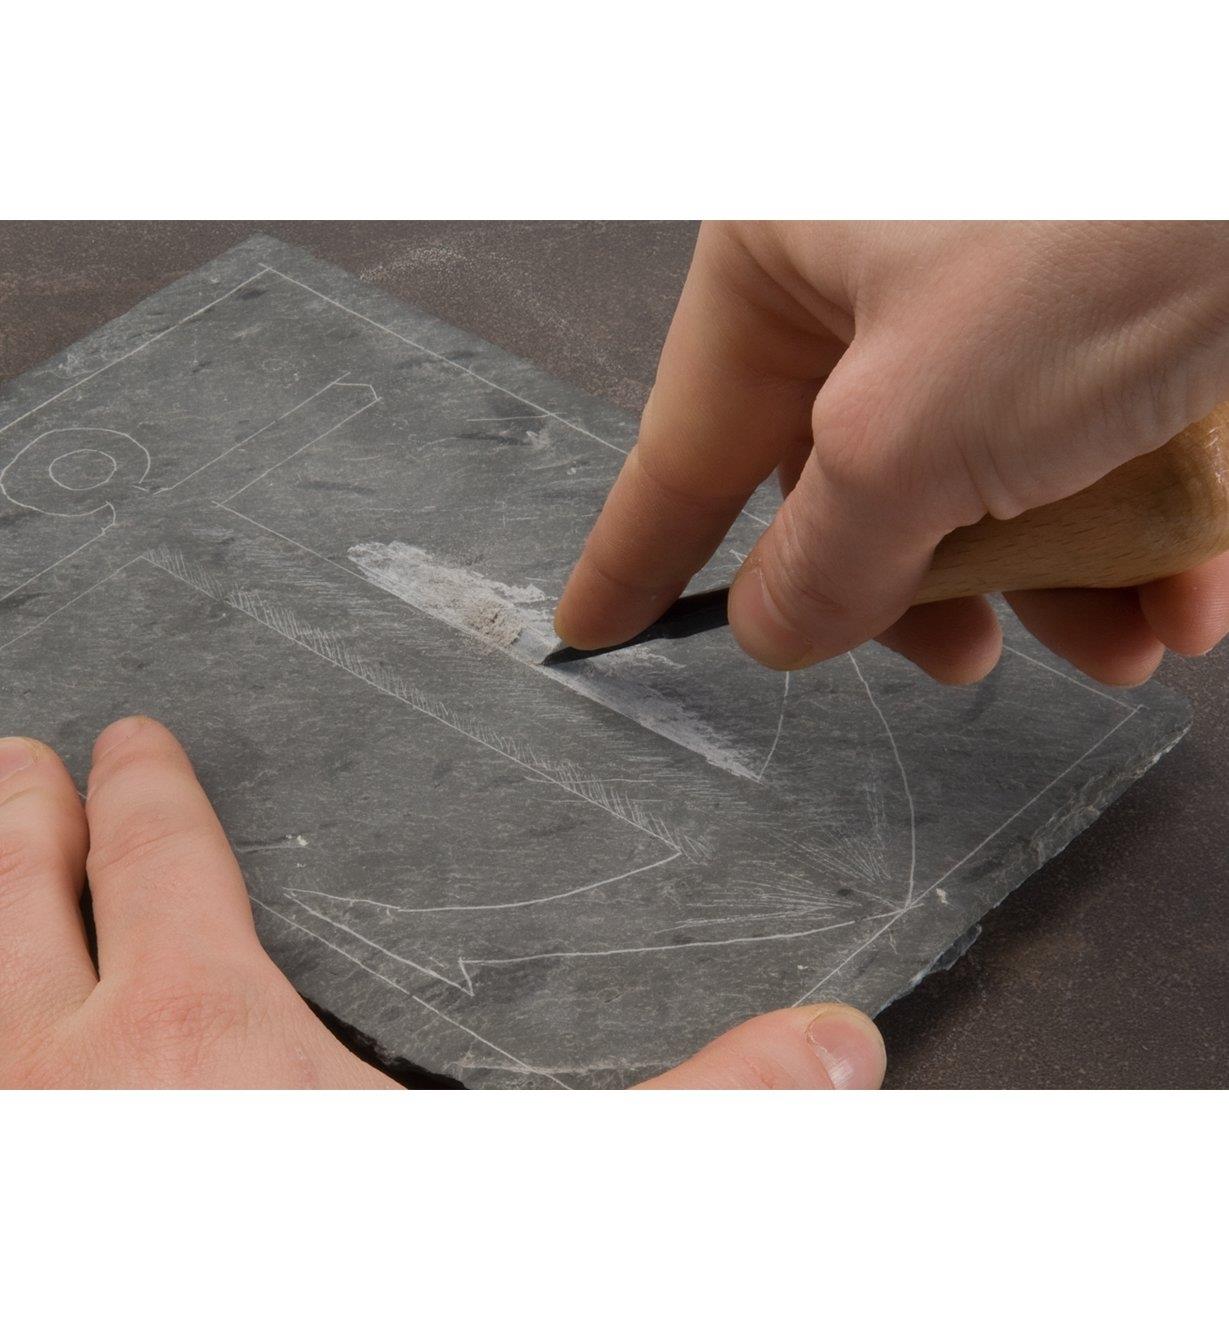 Using a chisel to engrave a design on slate